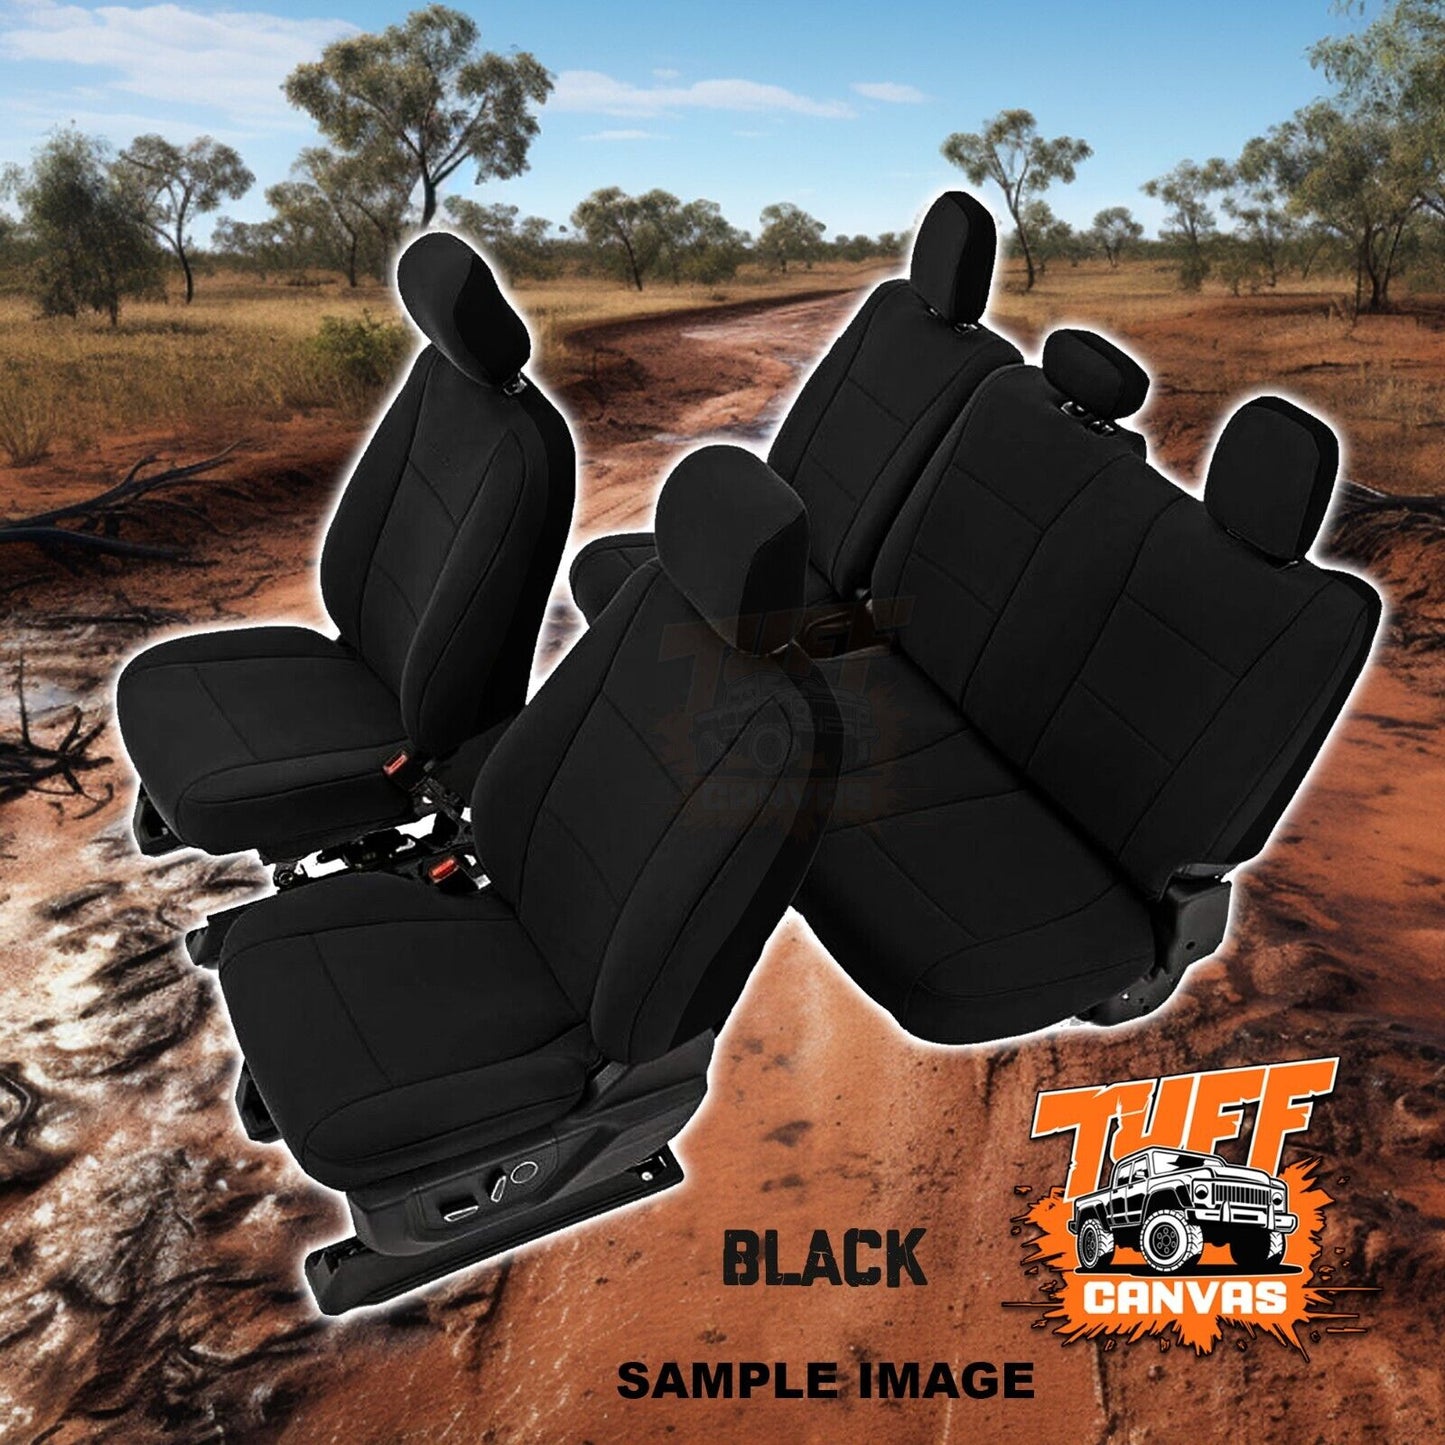 Black Tuff Canvas S2 Seat Covers 2 Rows For Ford Ranger PX2 PX3 Dual Cab XL XLT 6/2015-4/2022